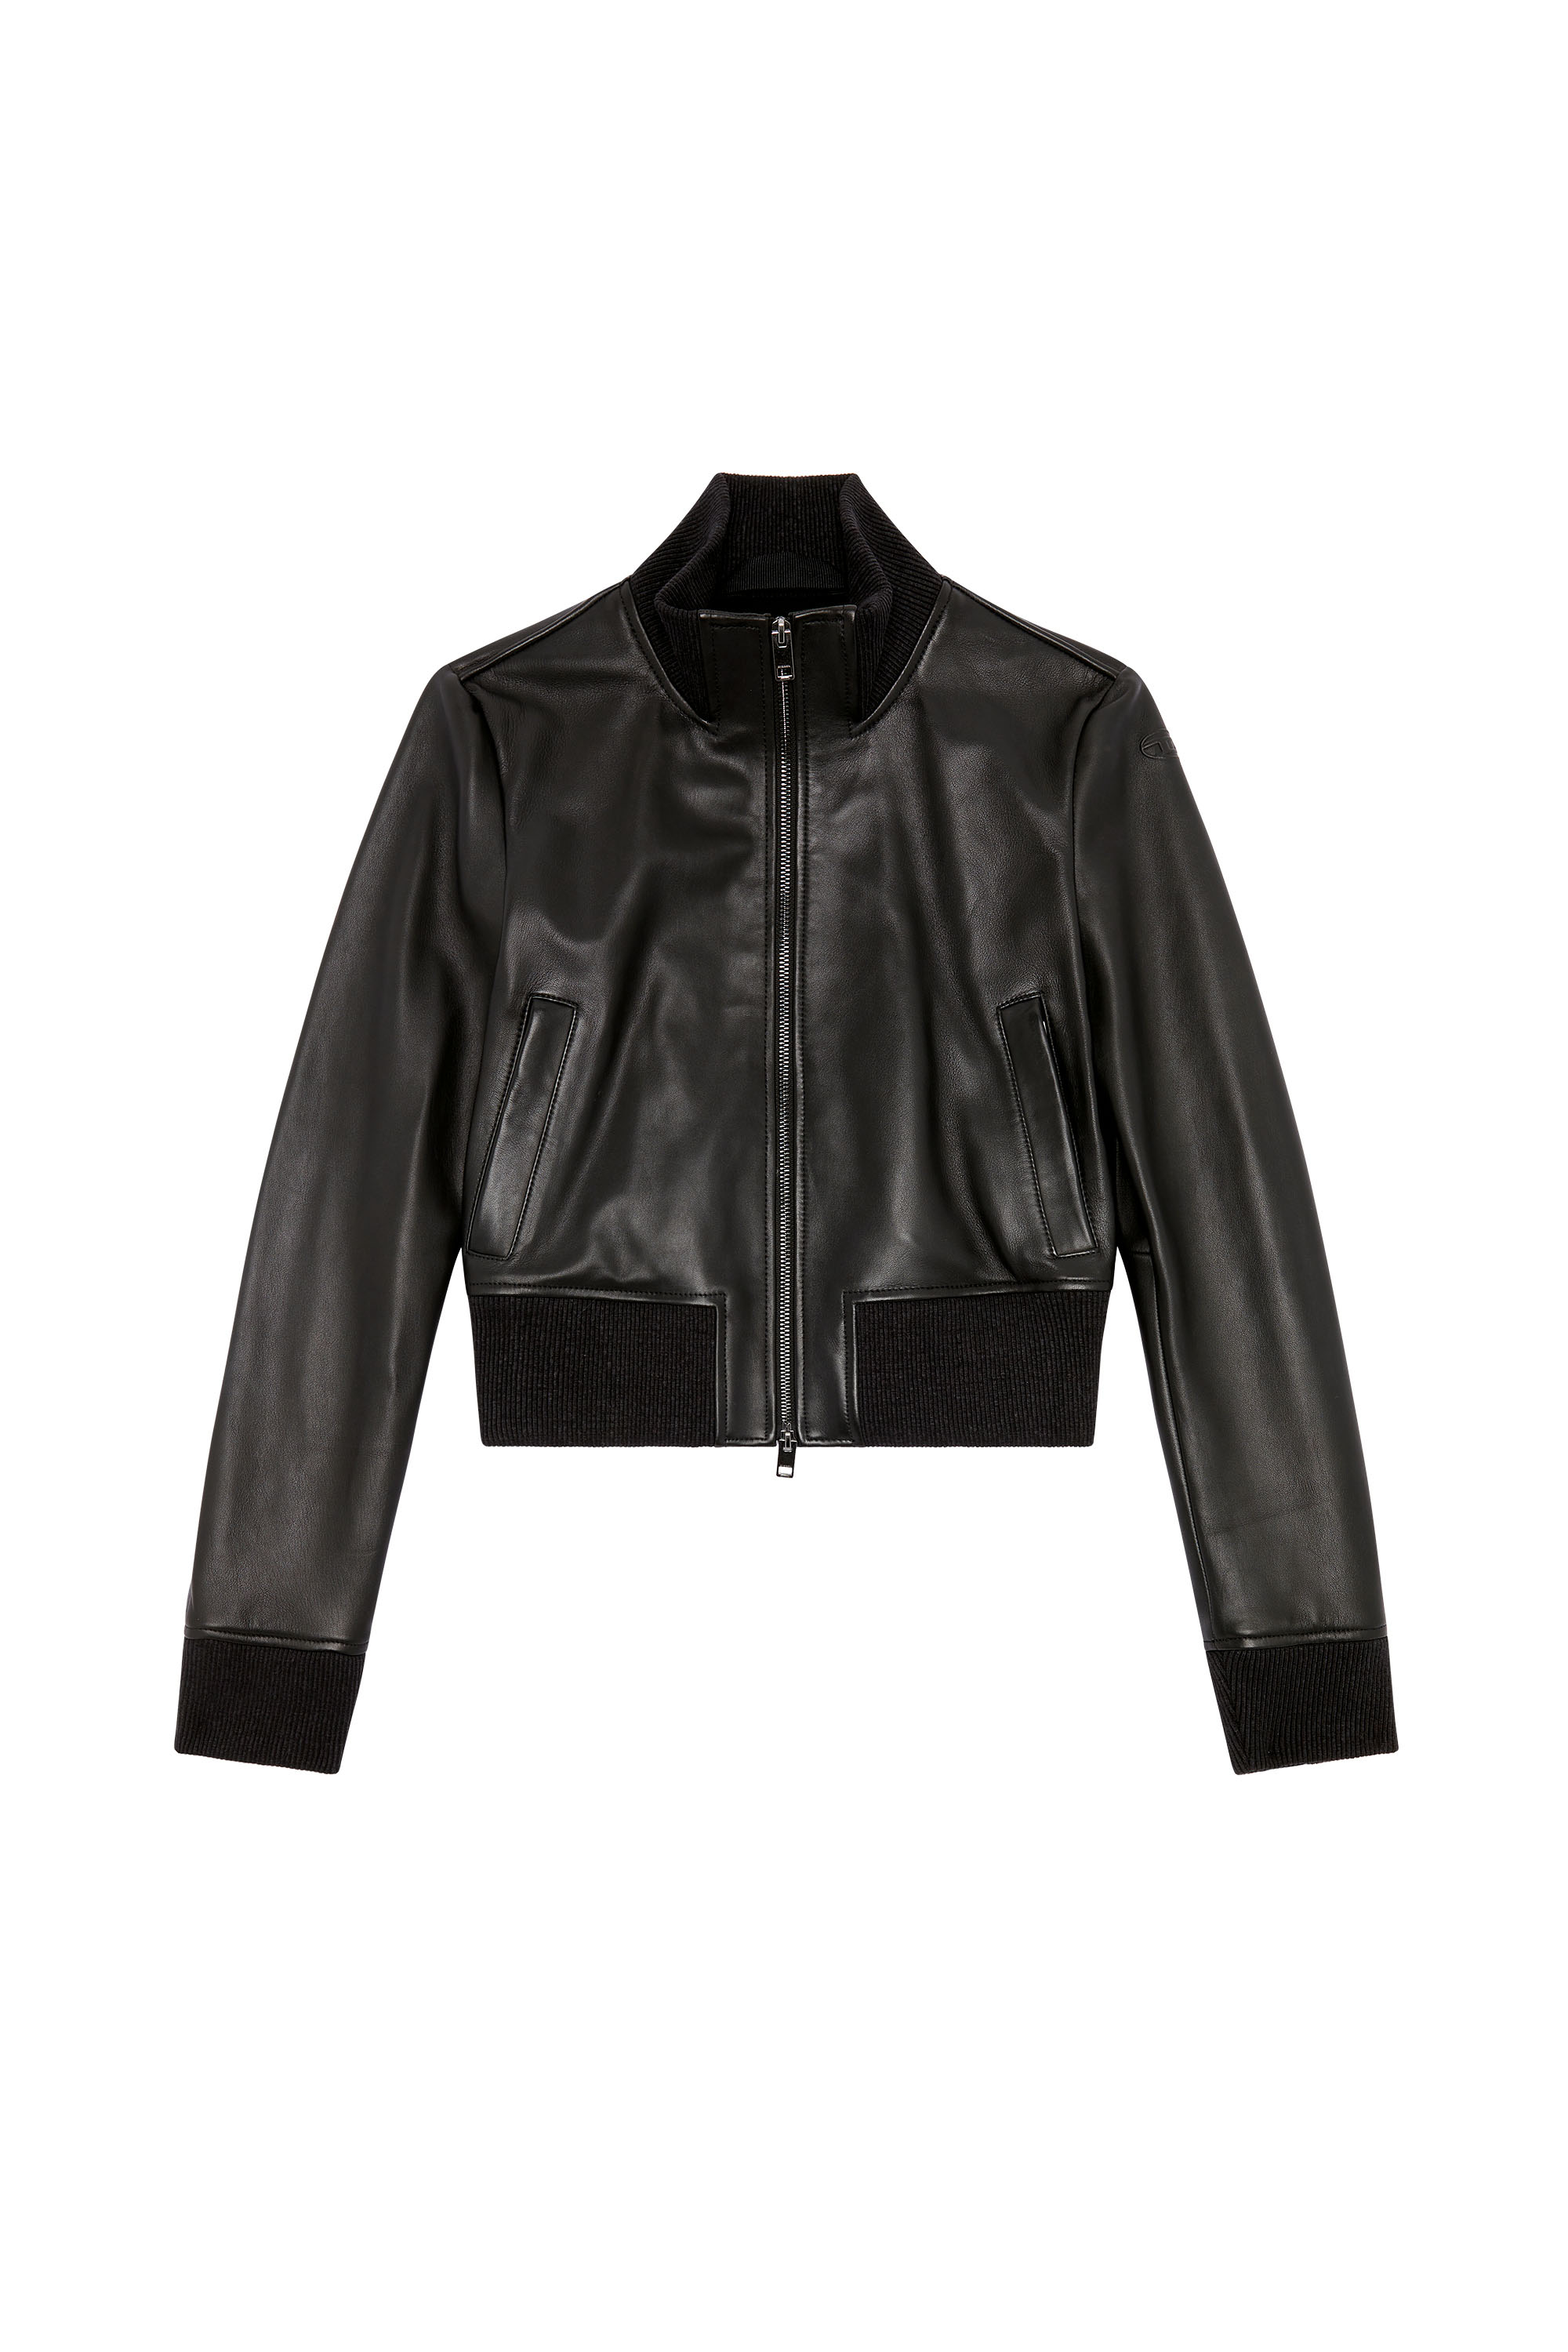 Diesel - L-HUNG, Woman Bomber jacket in waxed leather in Black - Image 3